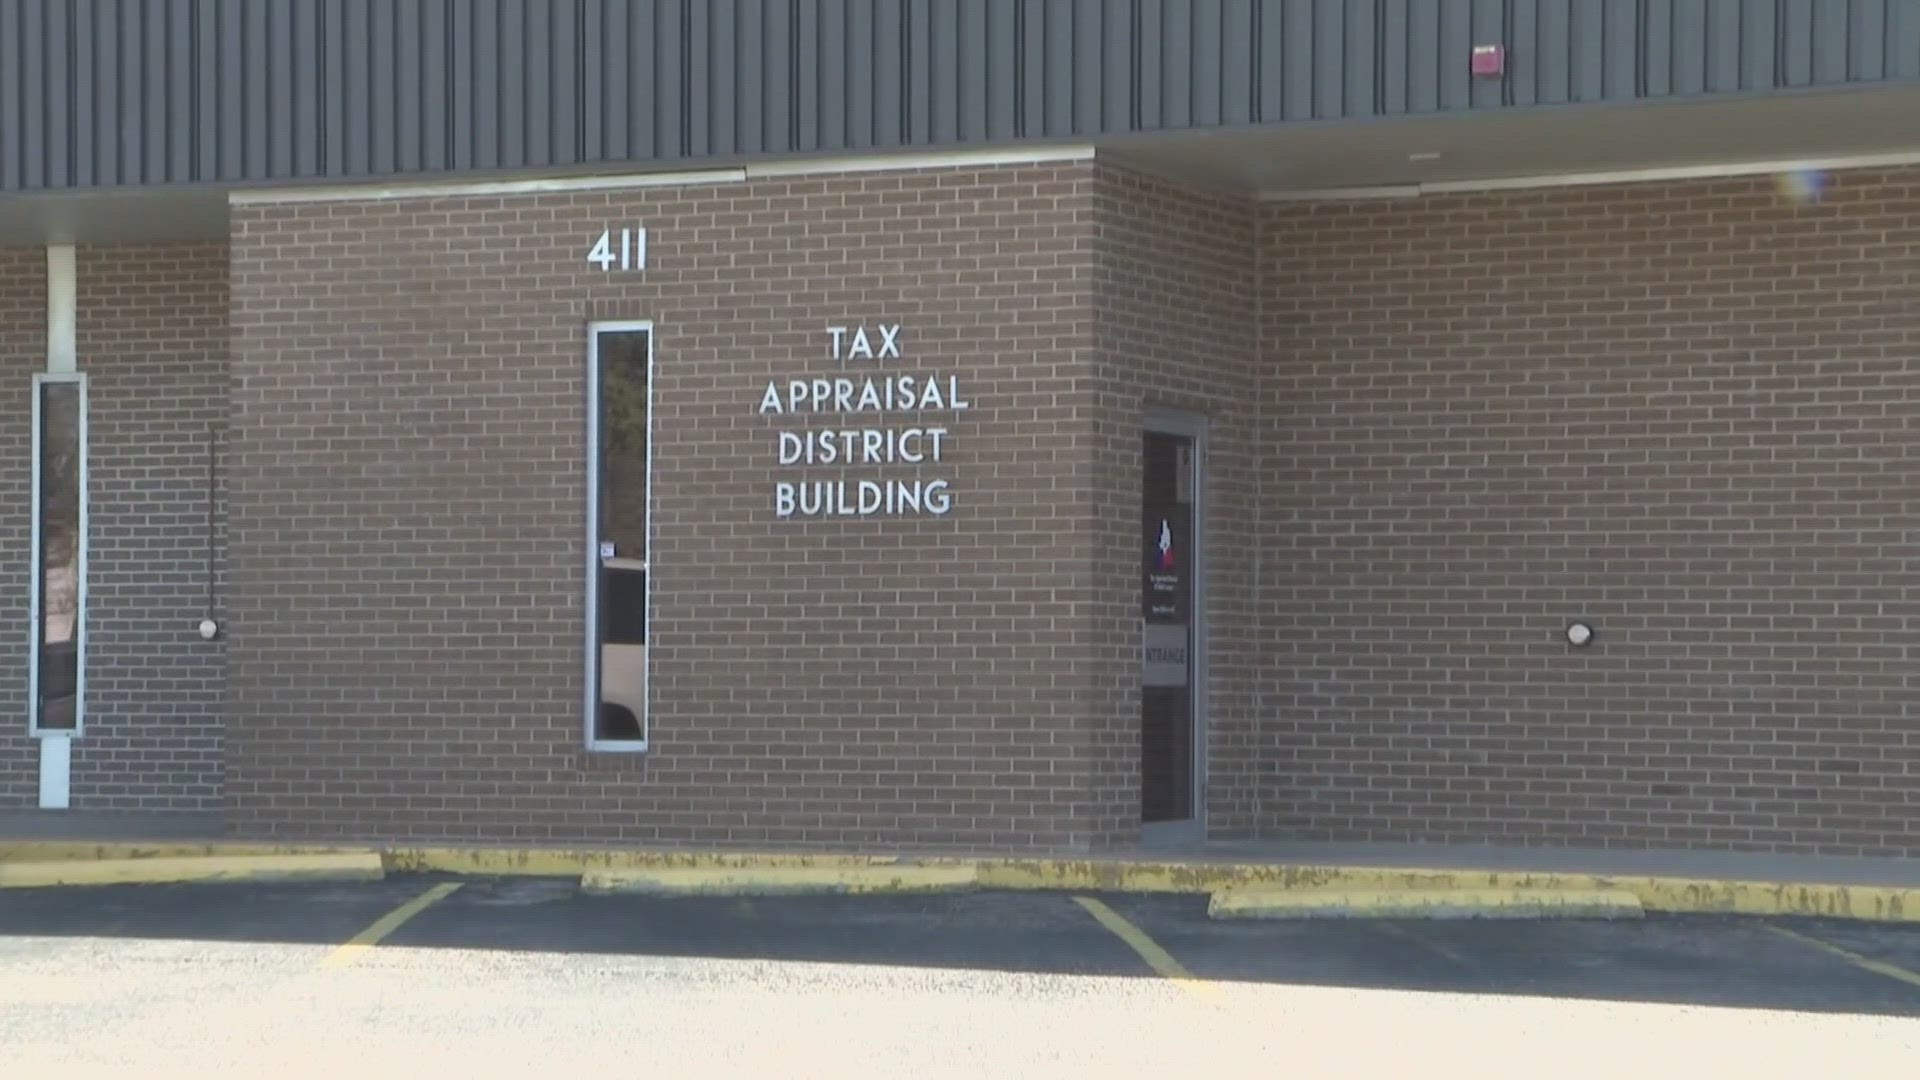 Appraisal notices will start being mailed to property owners within the next several weeks. The general deadline for filing an exemption application is before May 1.